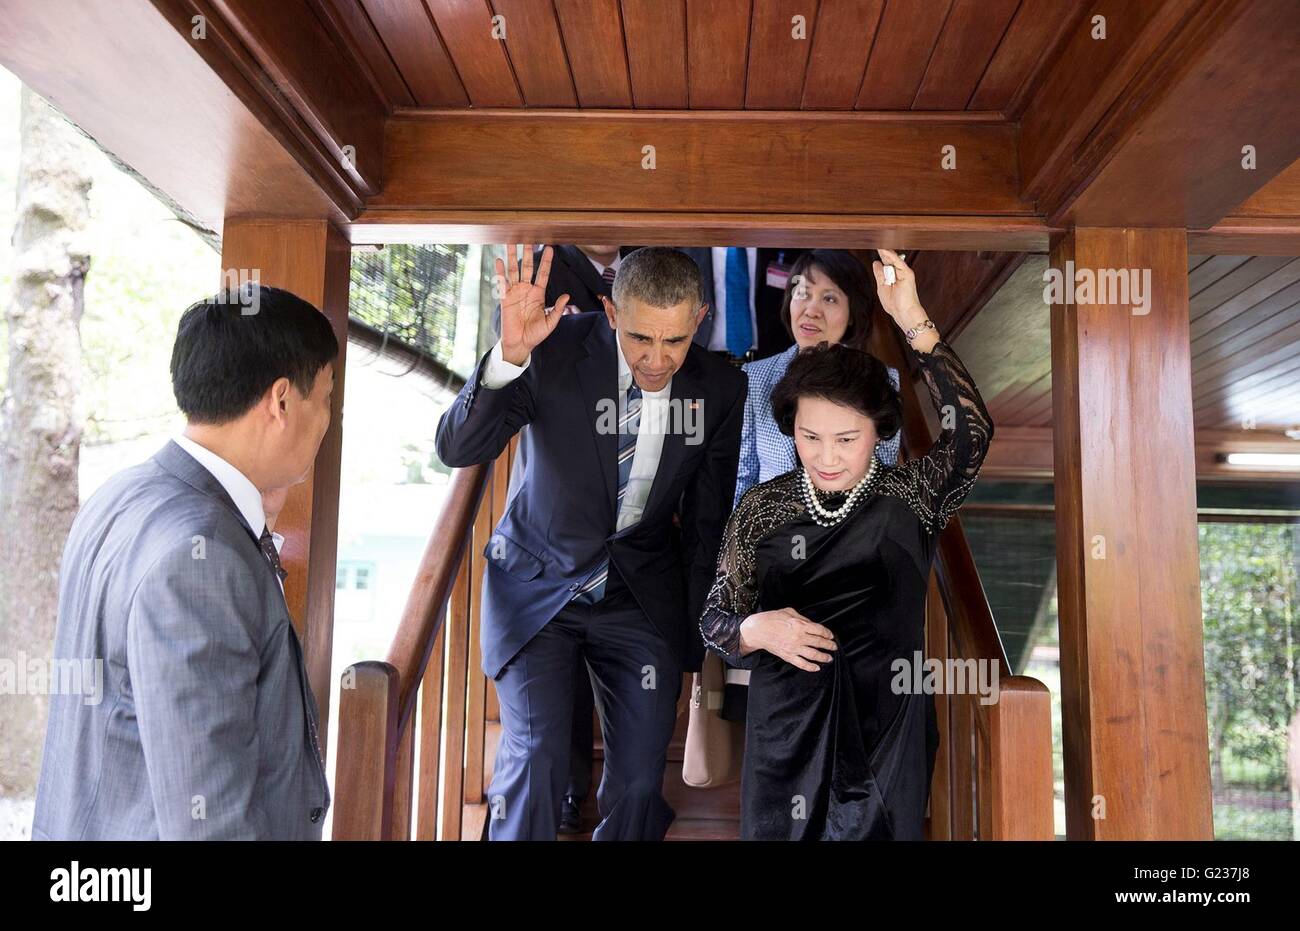 Hanoi, Vietnam. 23rd May, 2016. U.S President Barack Obama ducks under a low beam as he descends a staircase with Nguyen Thi Kim Ngan, Chairwoman of the National Assembly of the Socialist Republic of Vietnam, during a tour of Stilt House May 23, 2016 in Hanoi, Vietnam. Credit:  Planetpix/Alamy Live News Stock Photo